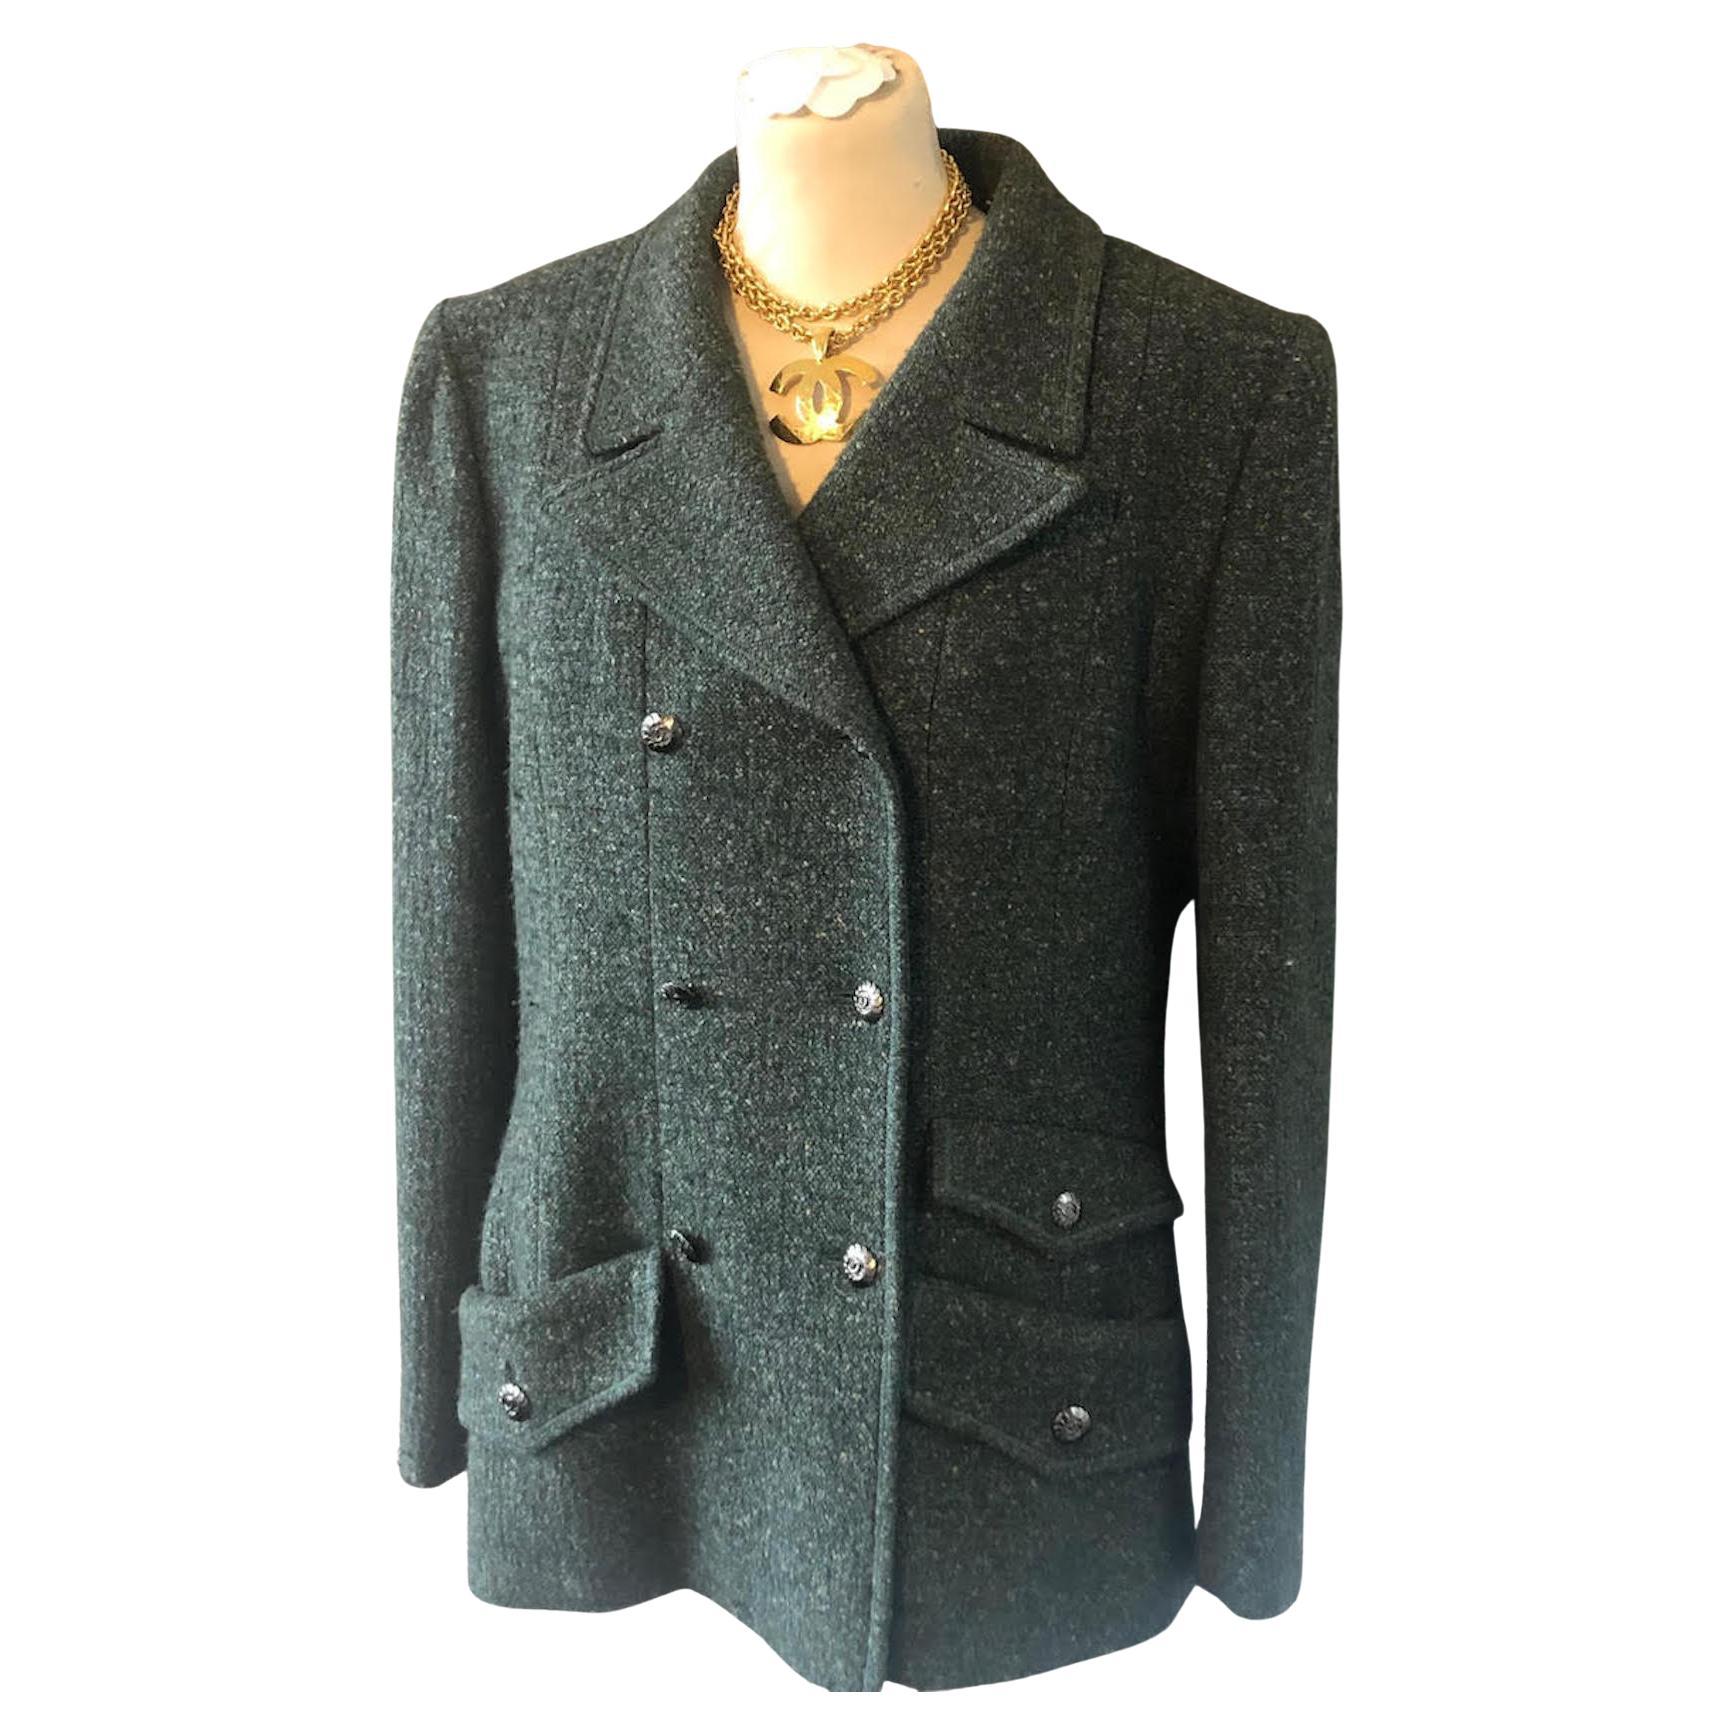 CHANEL 1997 Green Tweed Wool Bouclé Jacket Pre-Owned Double Breasted